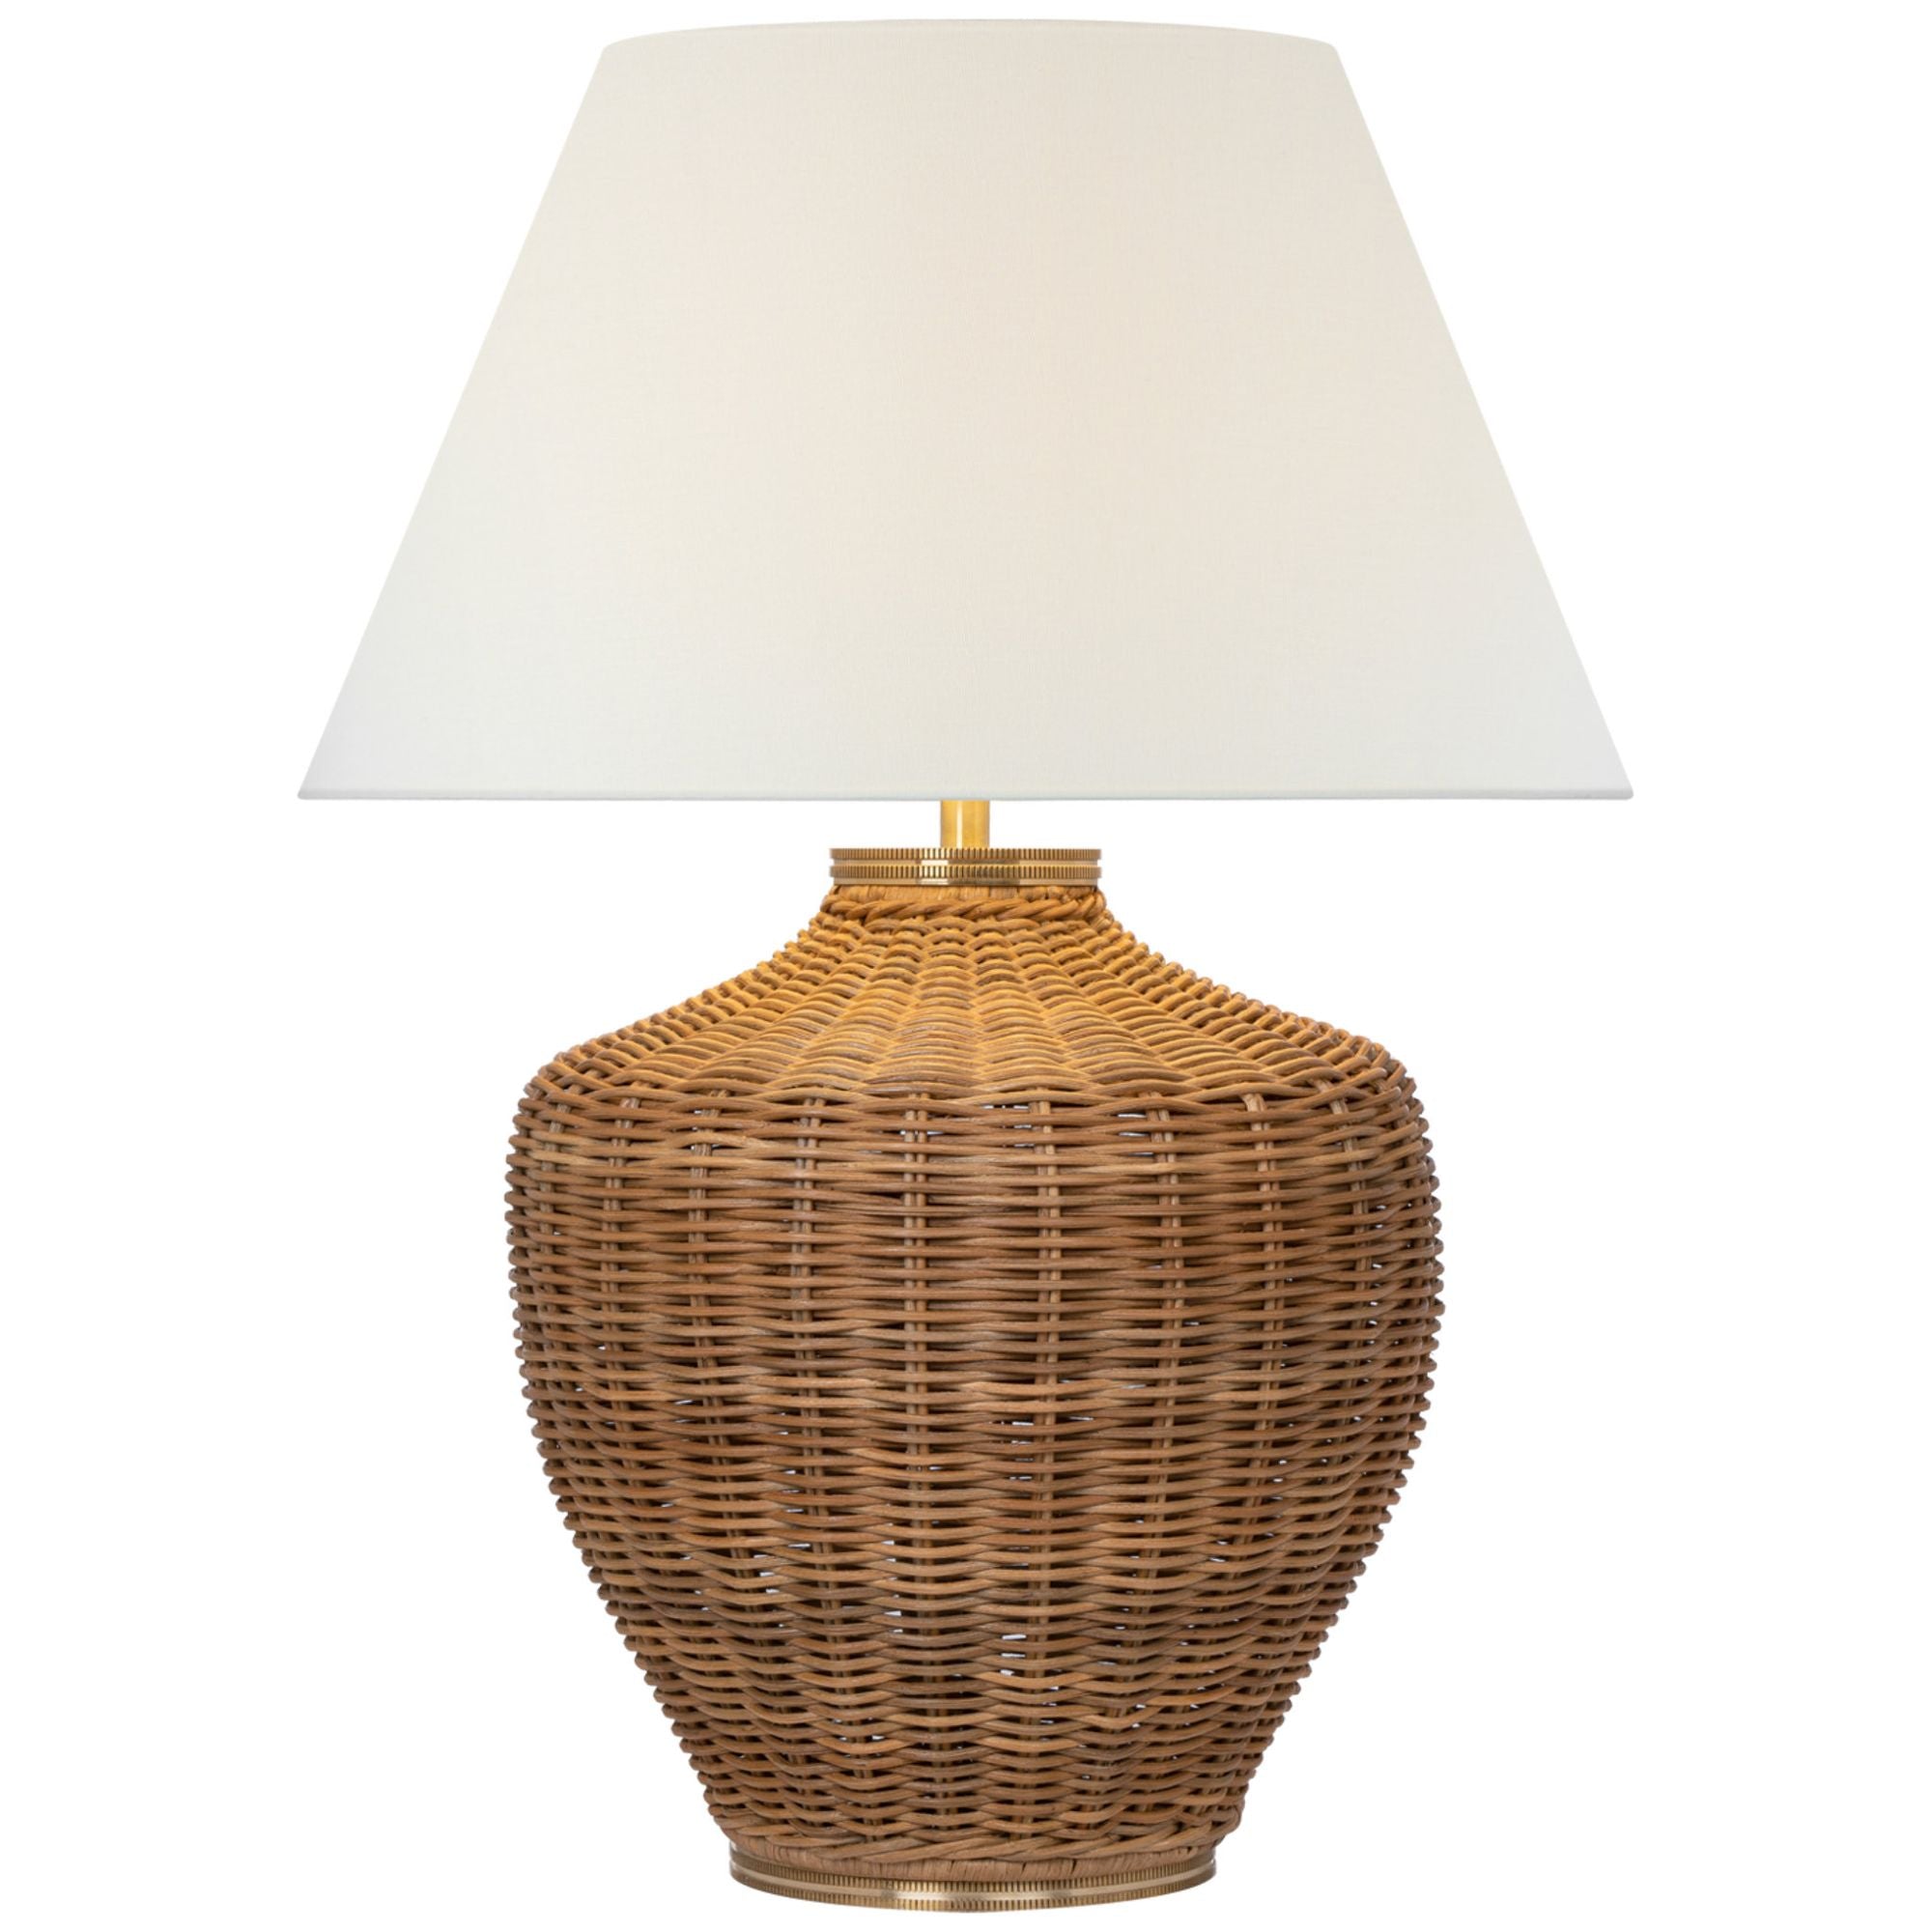 Marie Flanigan Evie Large Table Lamp in Natural Wicker with Linen Shade